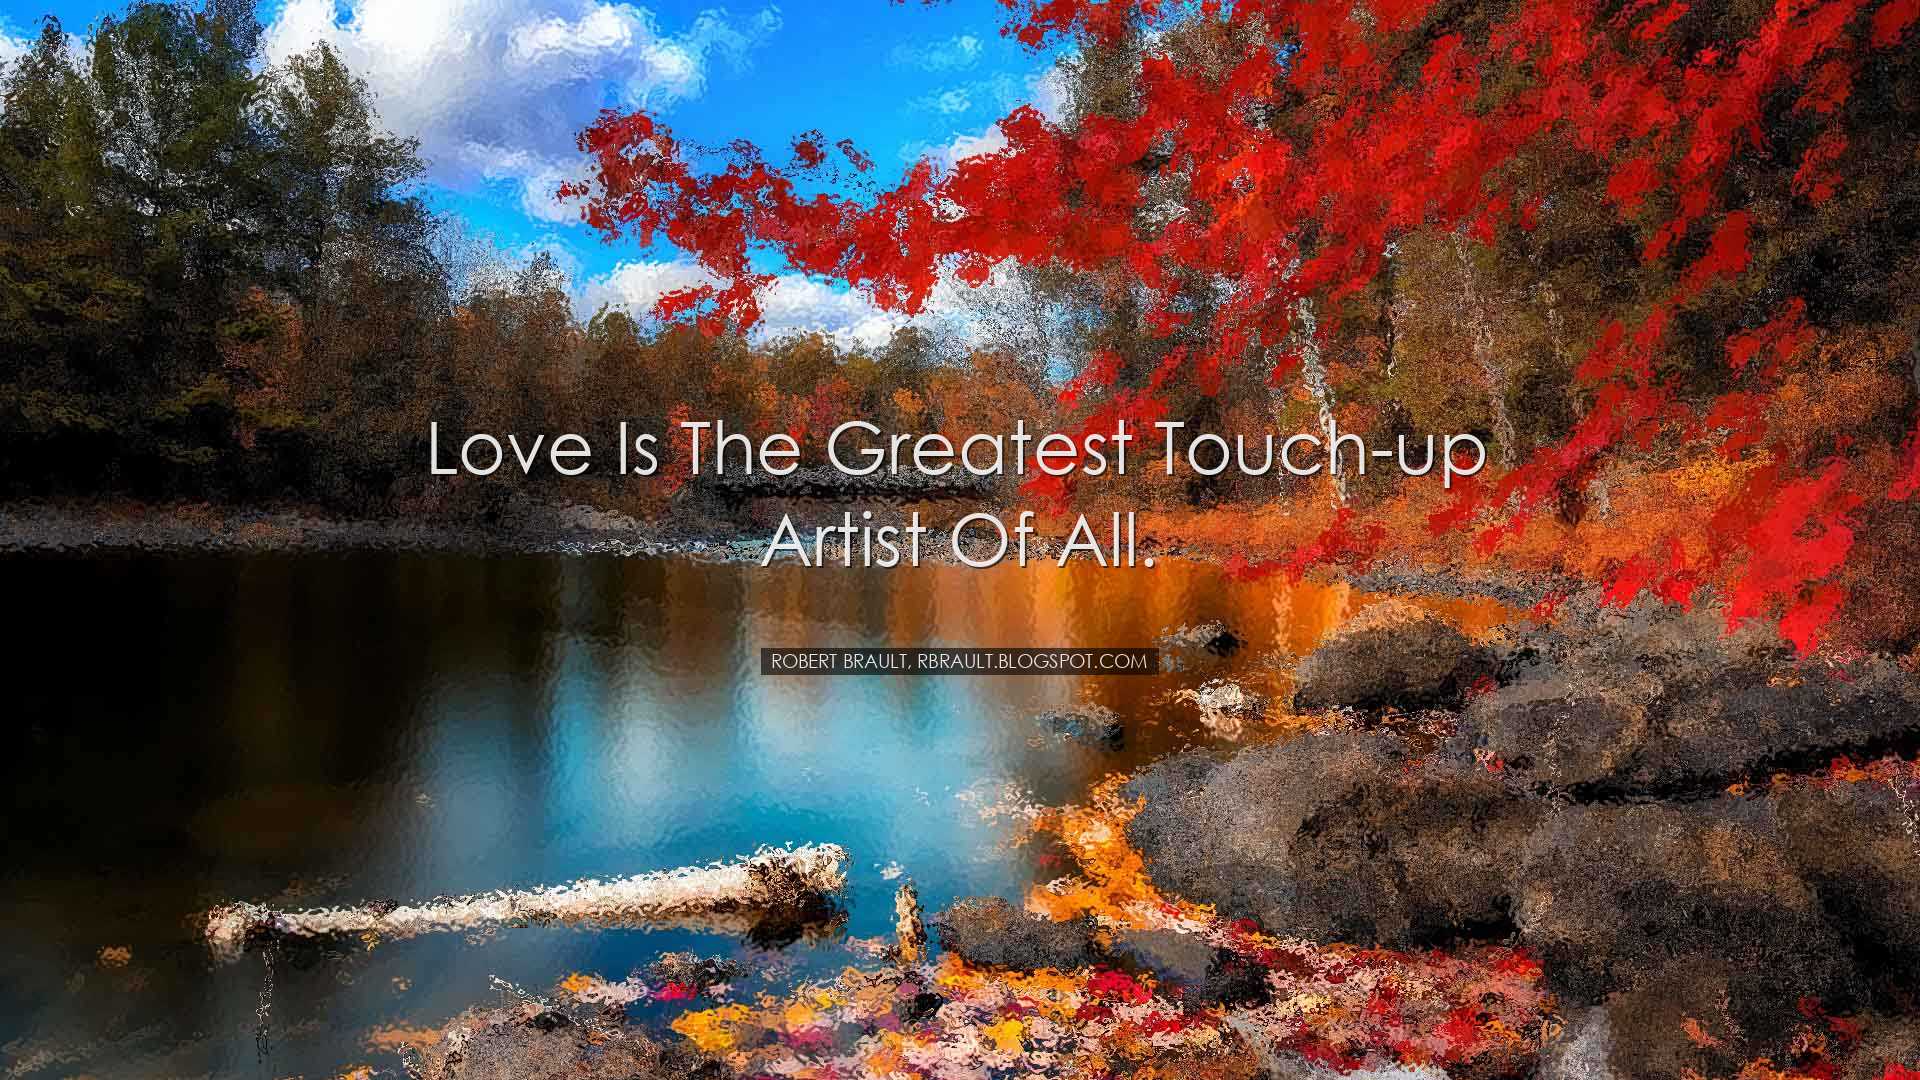 Love is the greatest touch-up artist of all. - Robert Brault, rbra